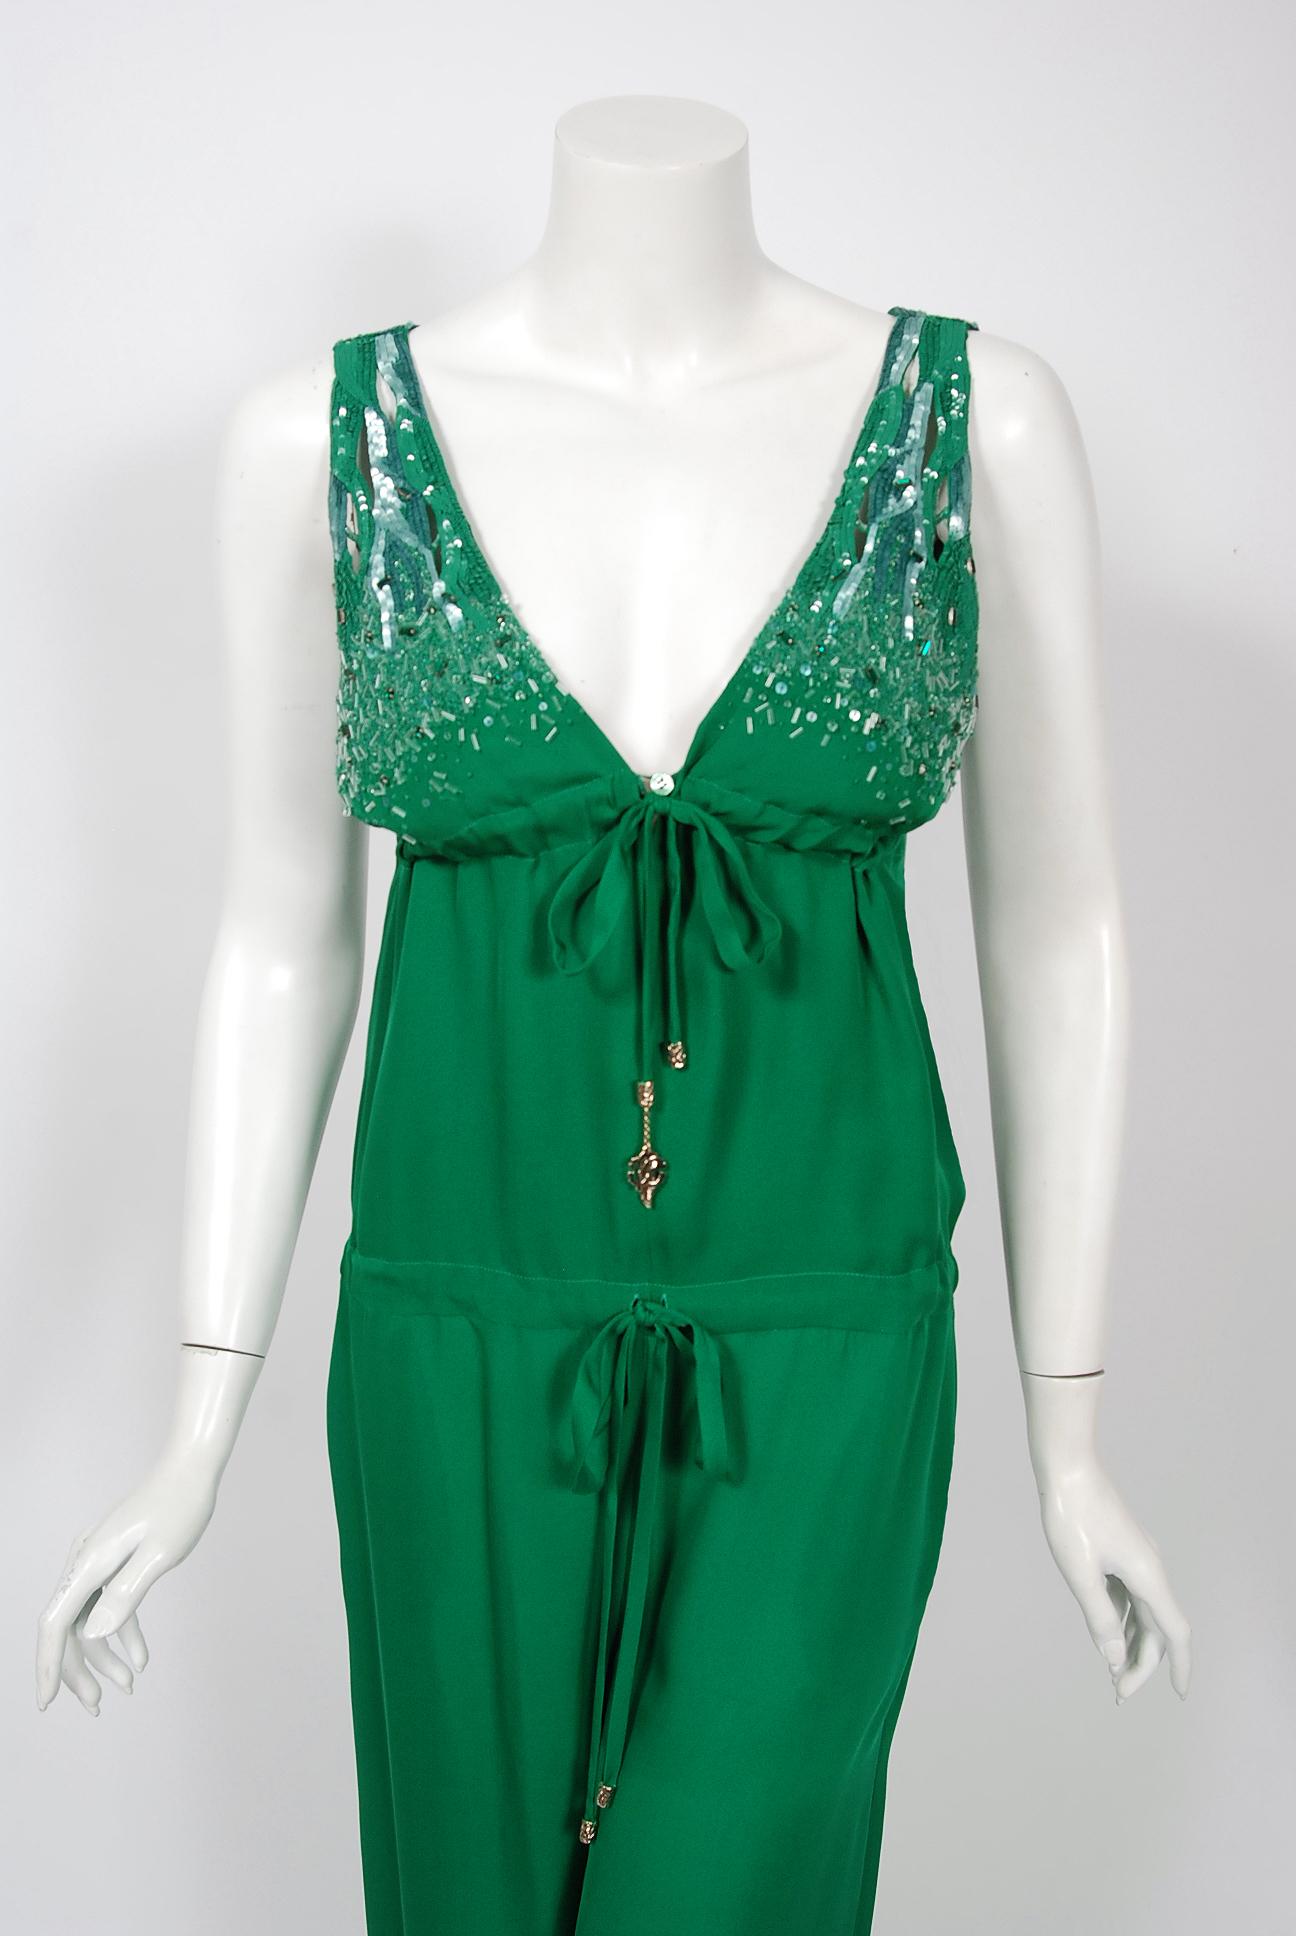 This gorgeous 2011 creation from Roberto Cavalli is not only striking but shockingly timeless. The fabric is luxurious emerald green high-quality silk upon which glass-beads and jewels in the matching hue have been worked in so there is a beautiful